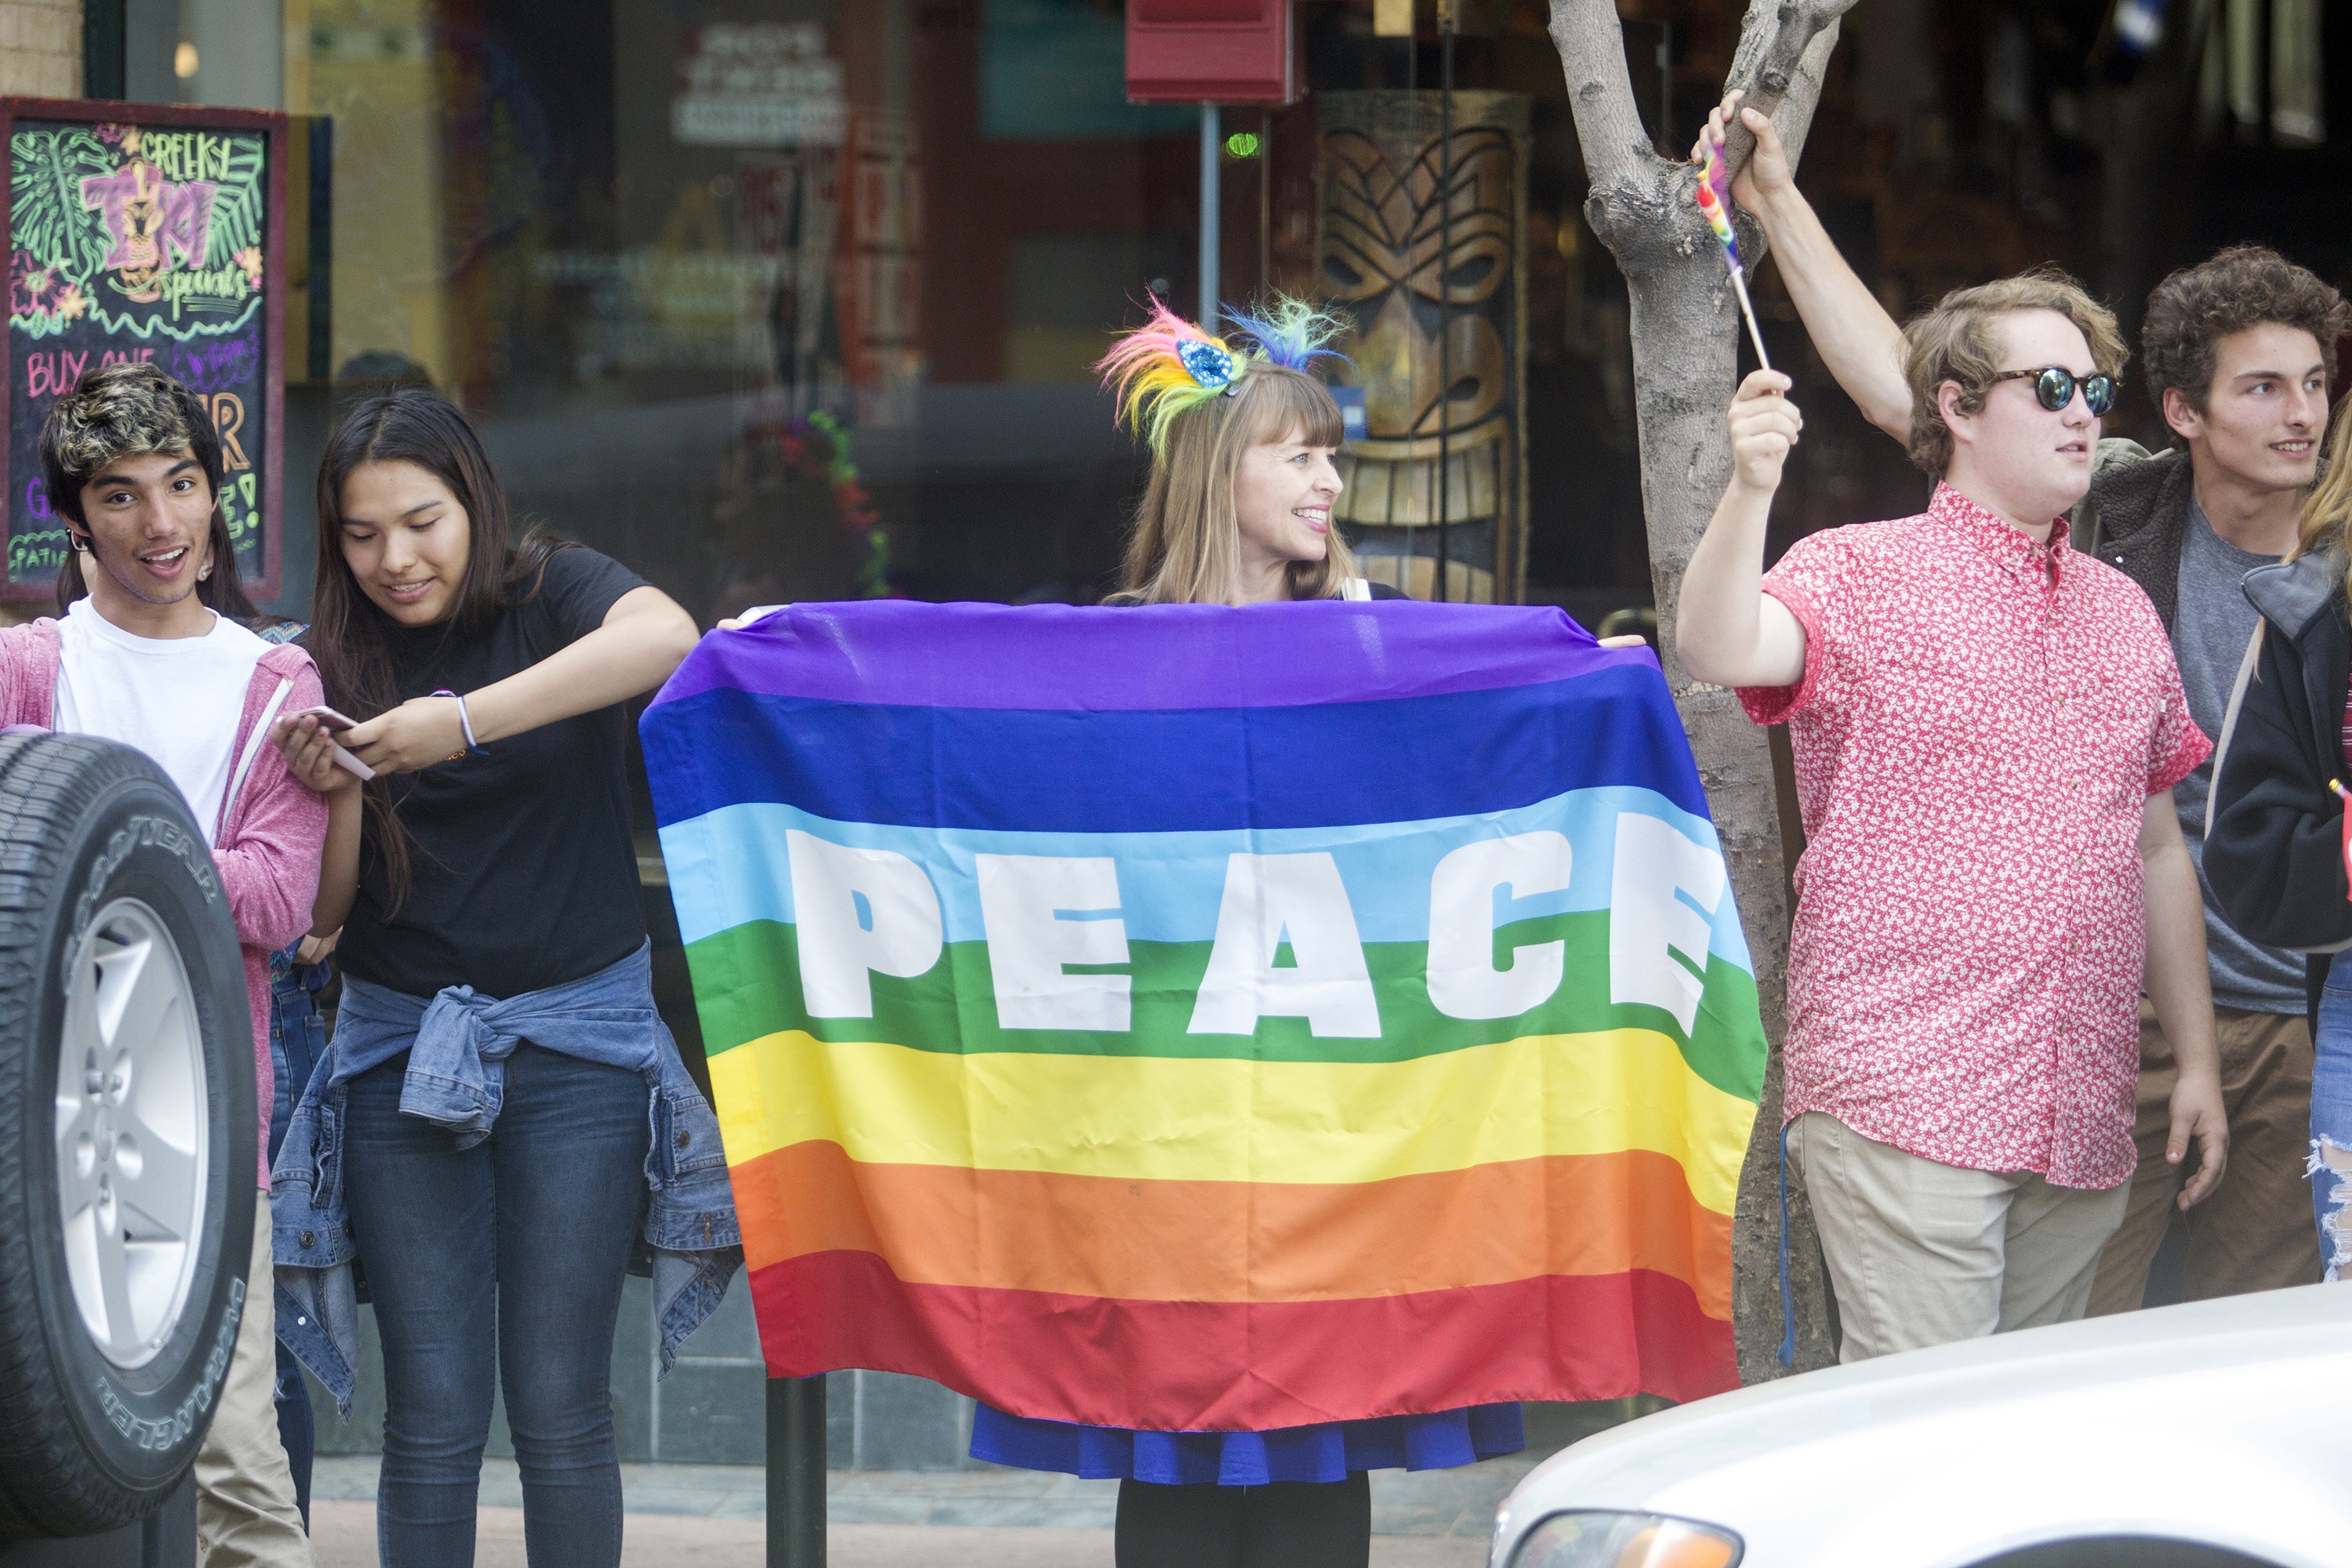 Central Coast Pride organizers reflect on the legacy of Pride in the